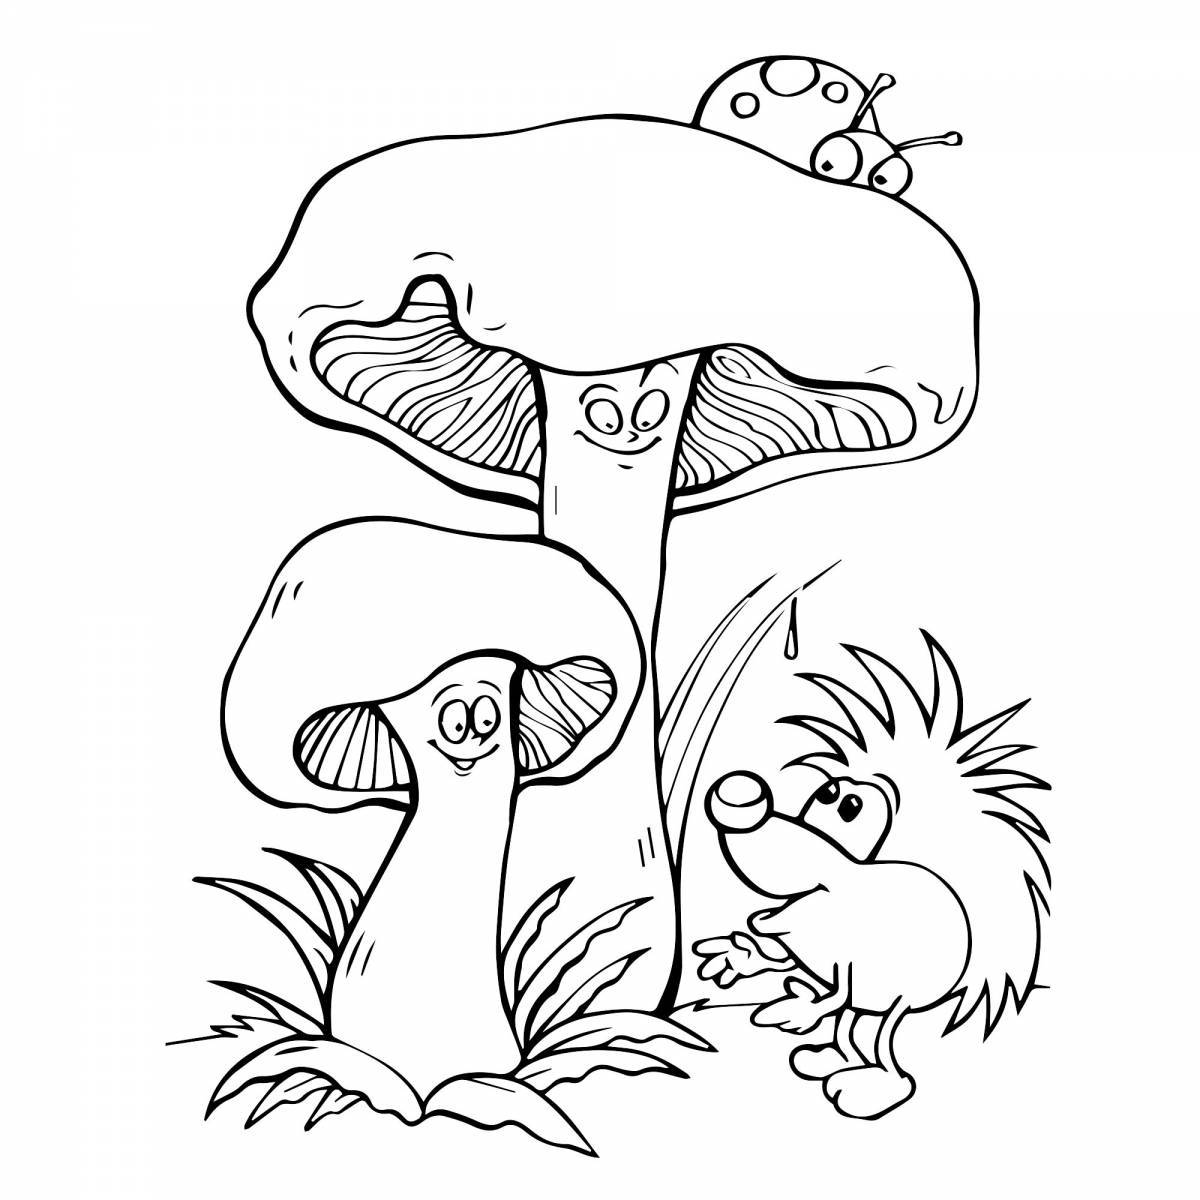 Live coloring of mushrooms for children